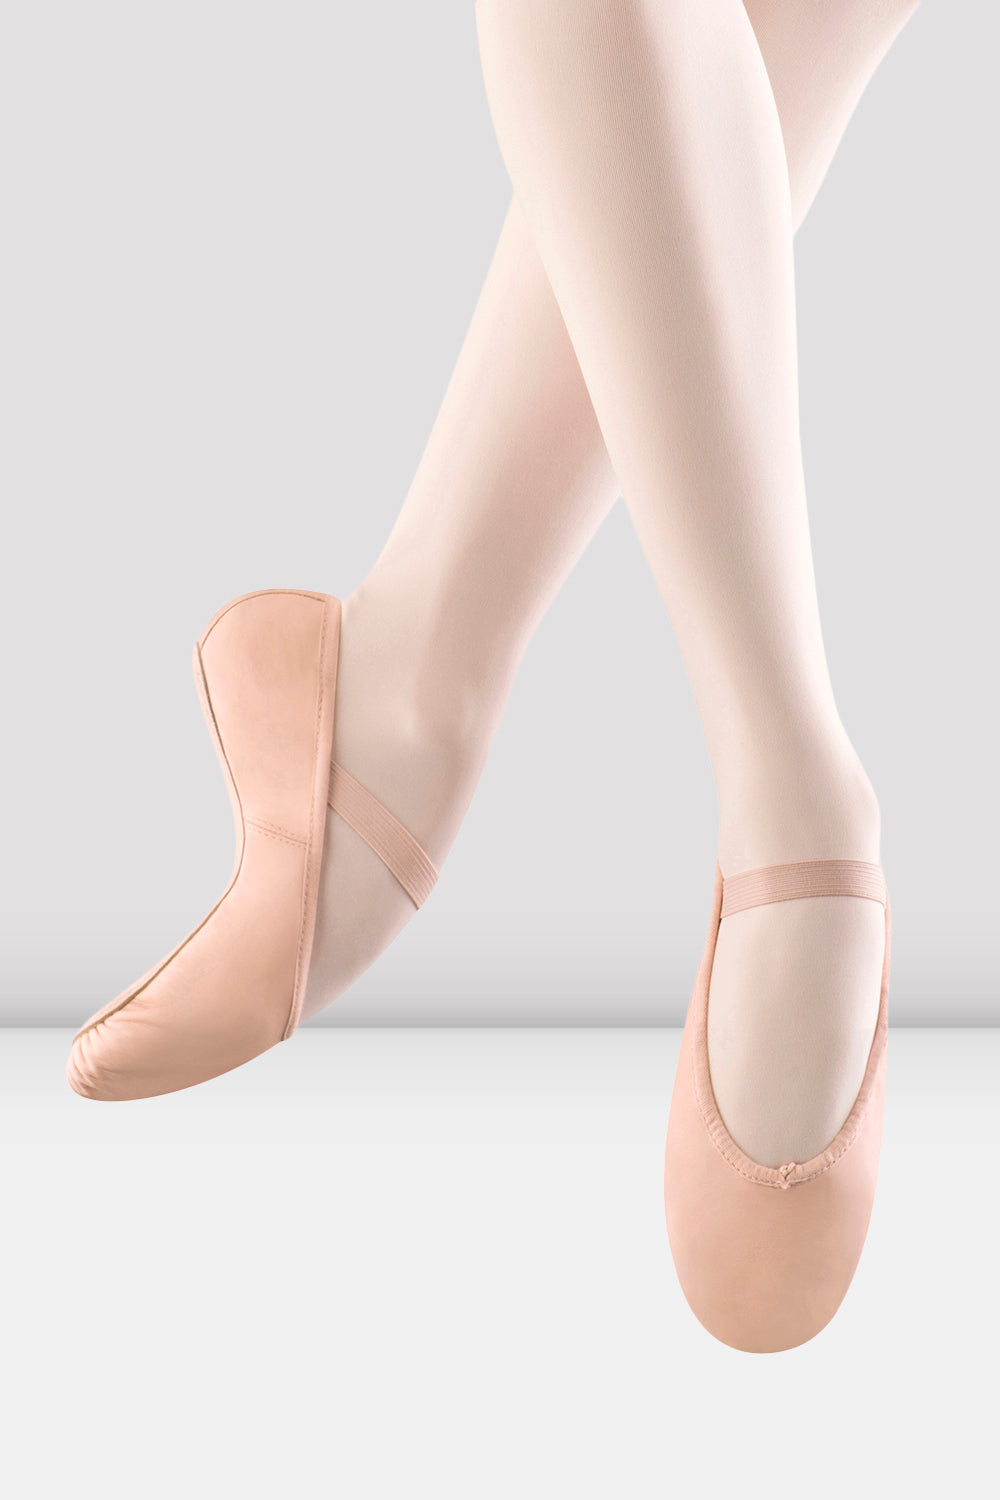 BLOCH Ladies Arise Leather Ballet Shoes, Pink Leather